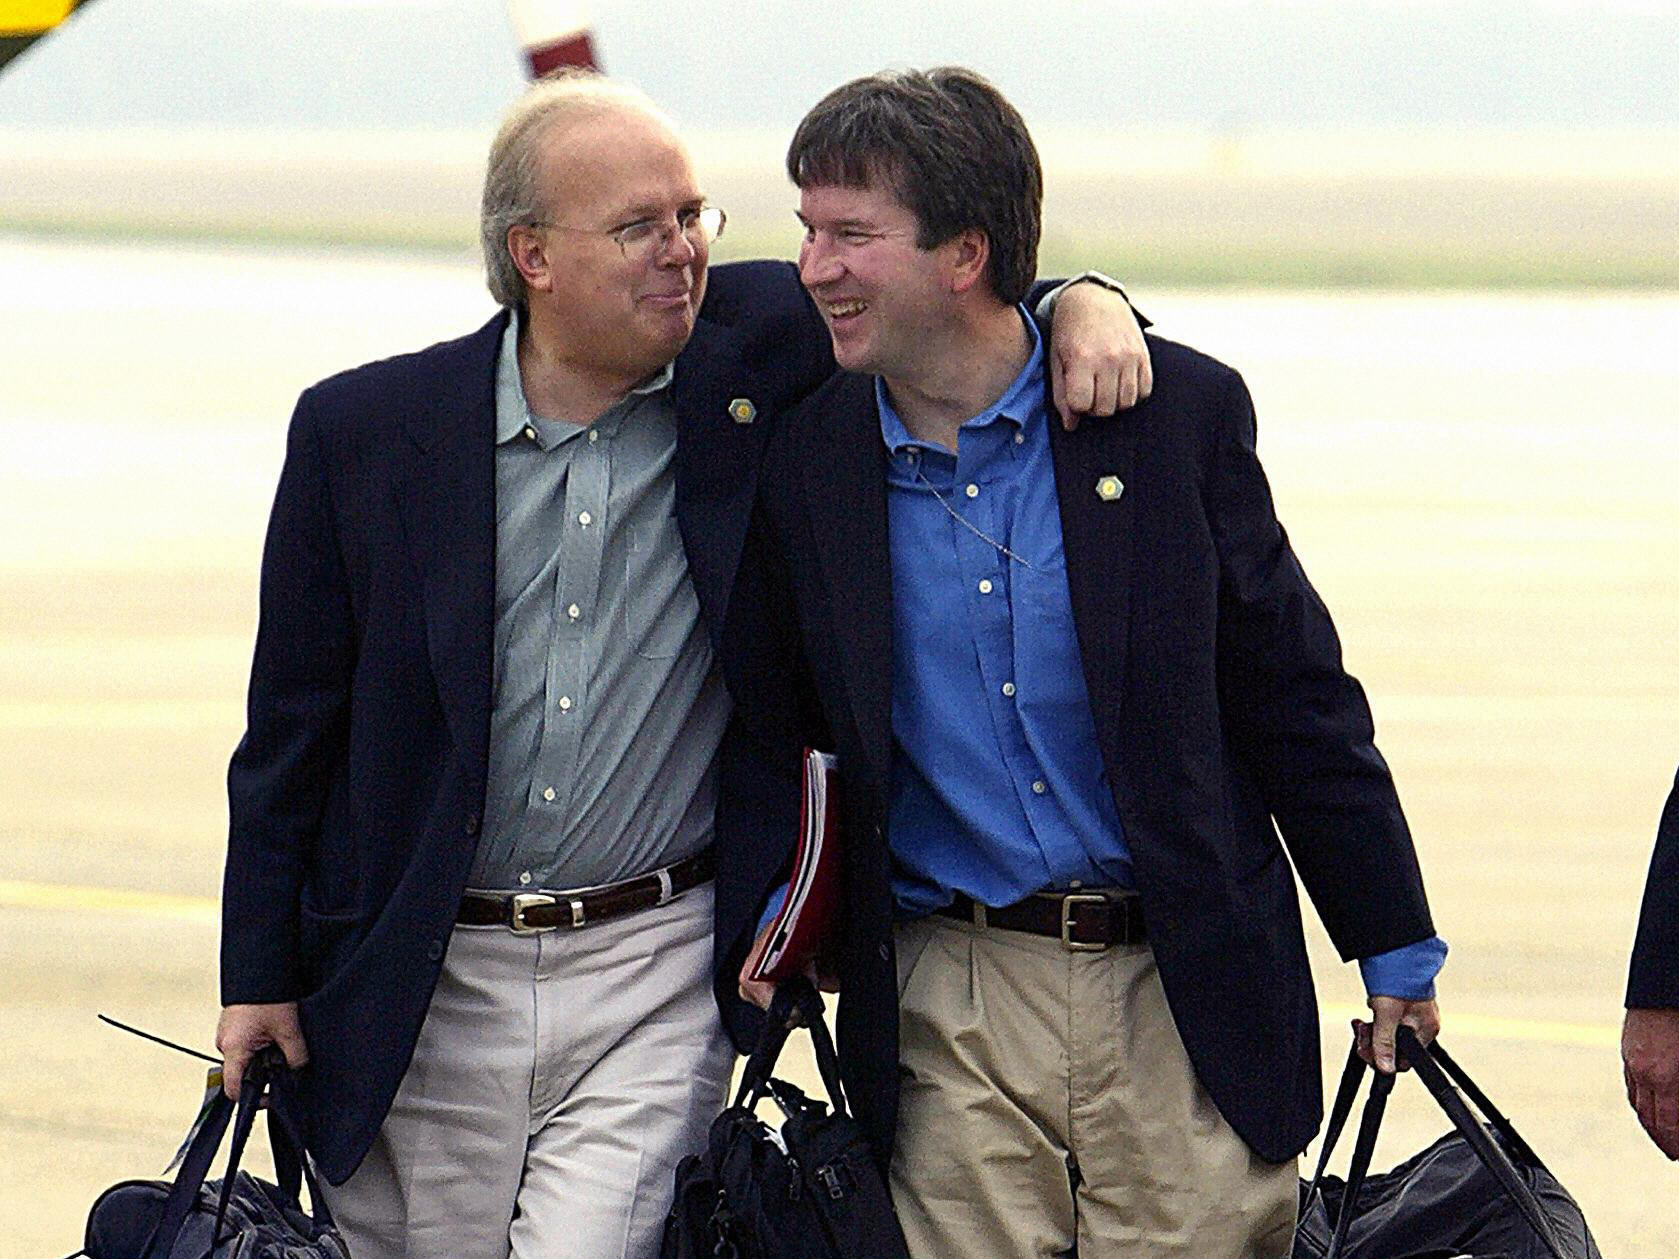 Presidential adviser Karl Rove, left, with Brett Kavanaugh in 2004. Kavanaugh was staff secretary in the White House at the time. (Photo by Paul J. Richards/AFP/Getty Images)